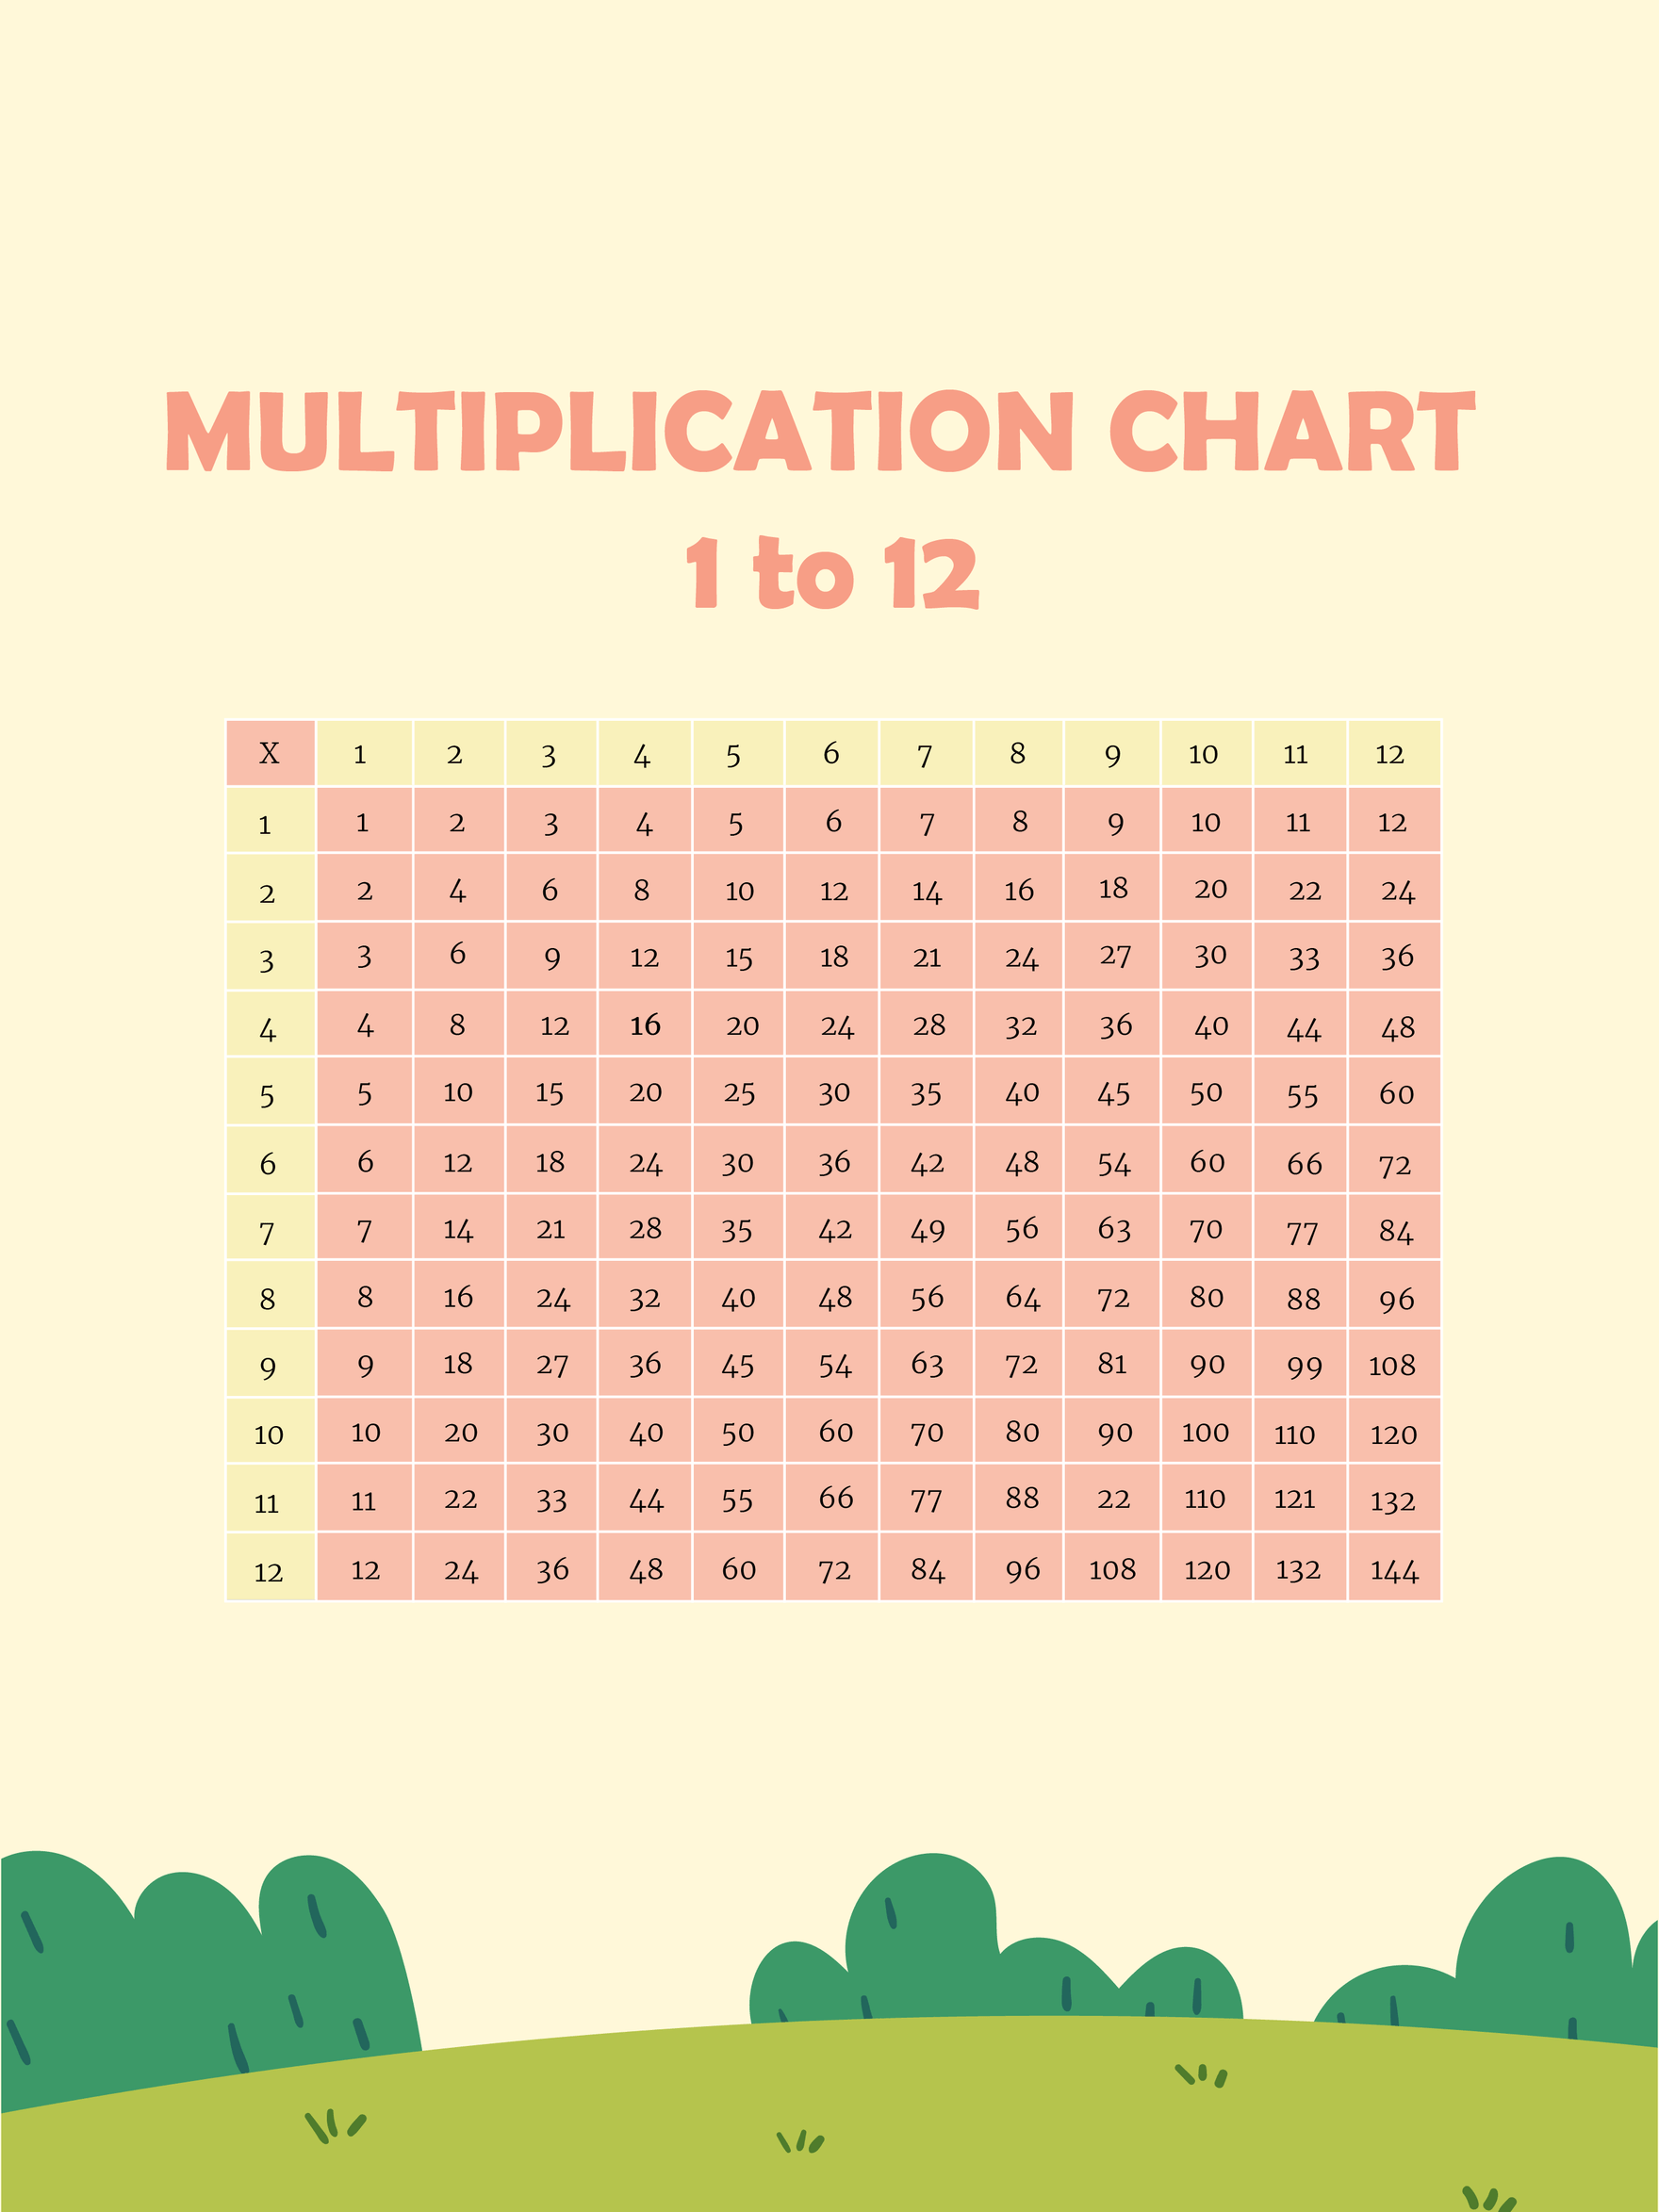 Free Multiplication Chart 1 To 12  in PDF, Illustrator